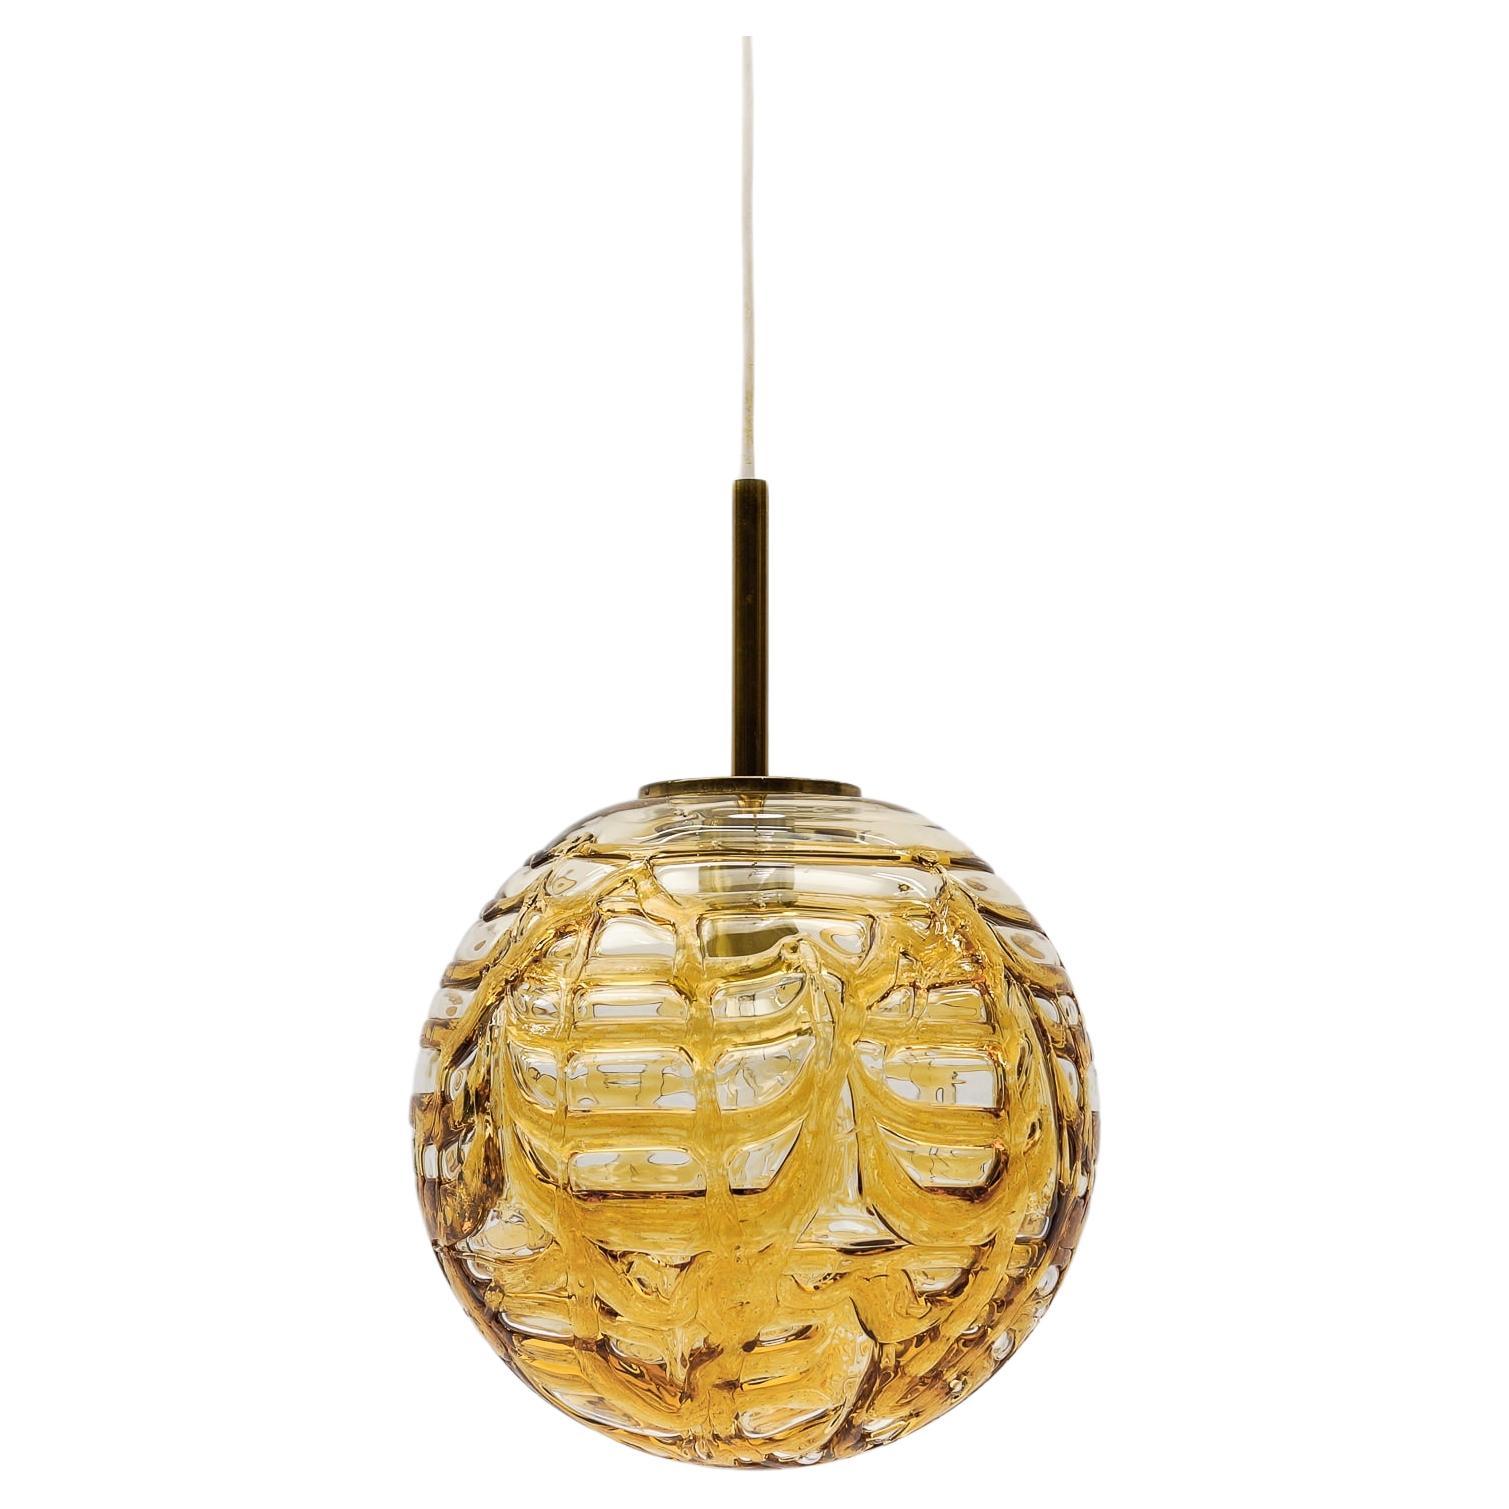 Yellow Murano Glass Ball Pendant Lamp by Doria, - 1960s Germany For Sale